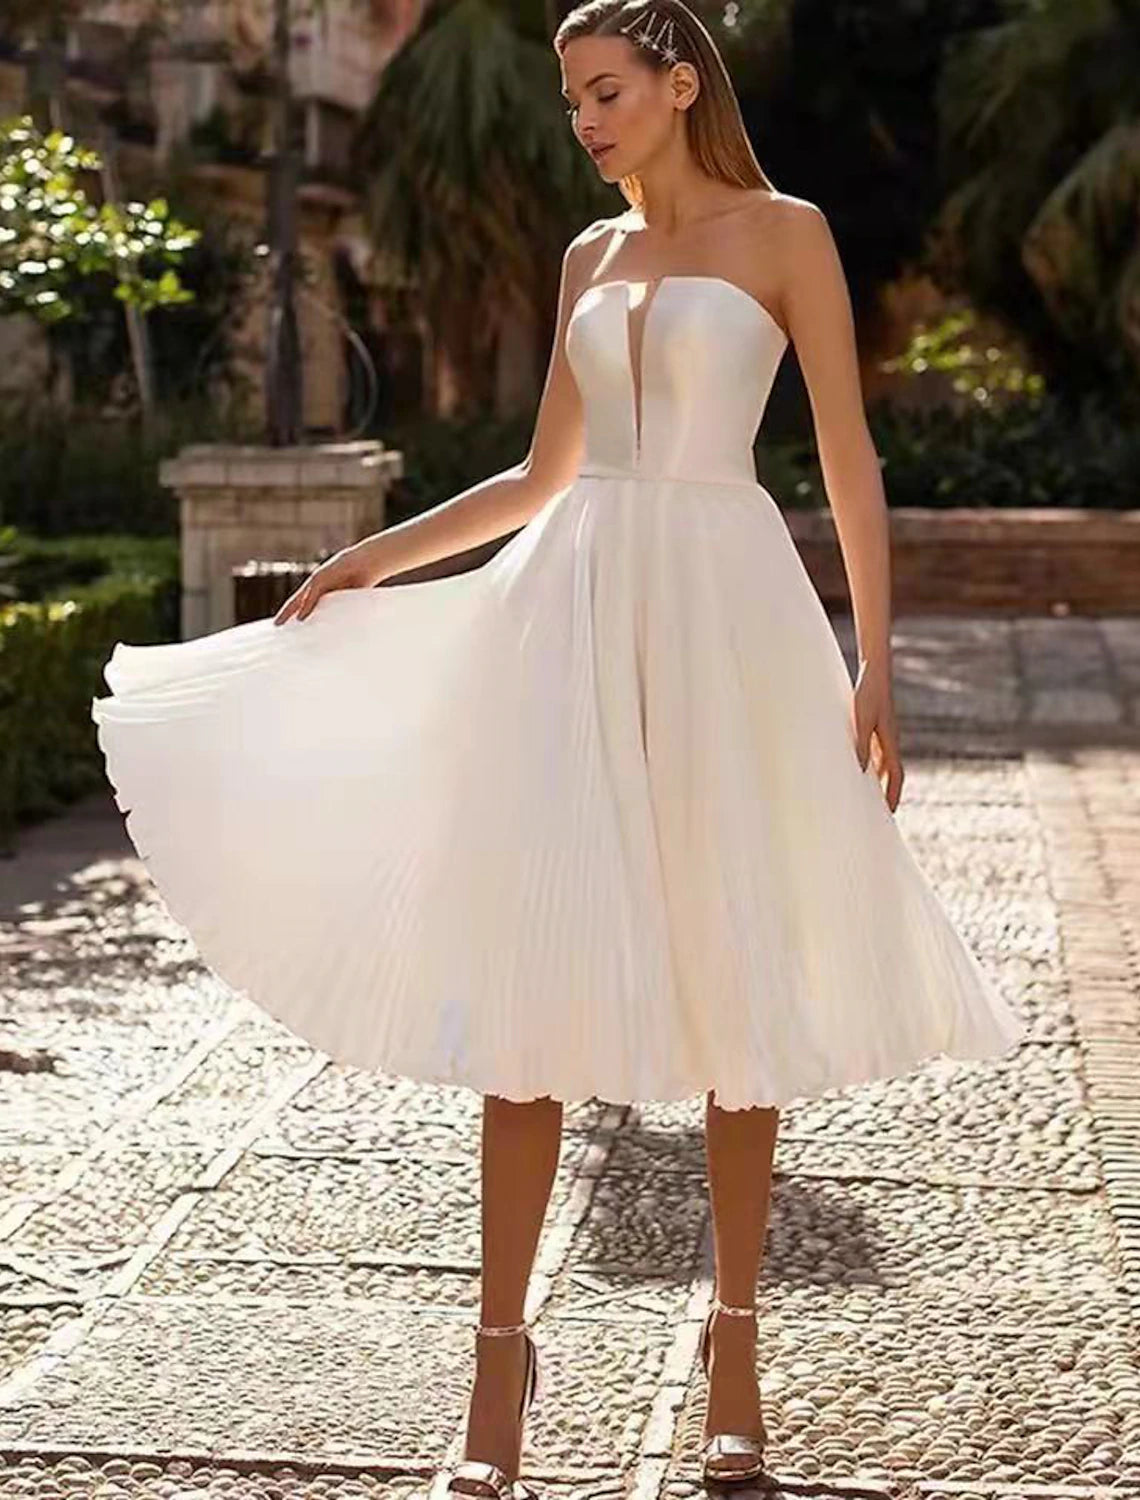 Reception Little White Dresses Wedding Dresses A-Line Sweetheart Strapless Tea Length Satin Bridal Gowns With Sash / Ribbon Solid Color